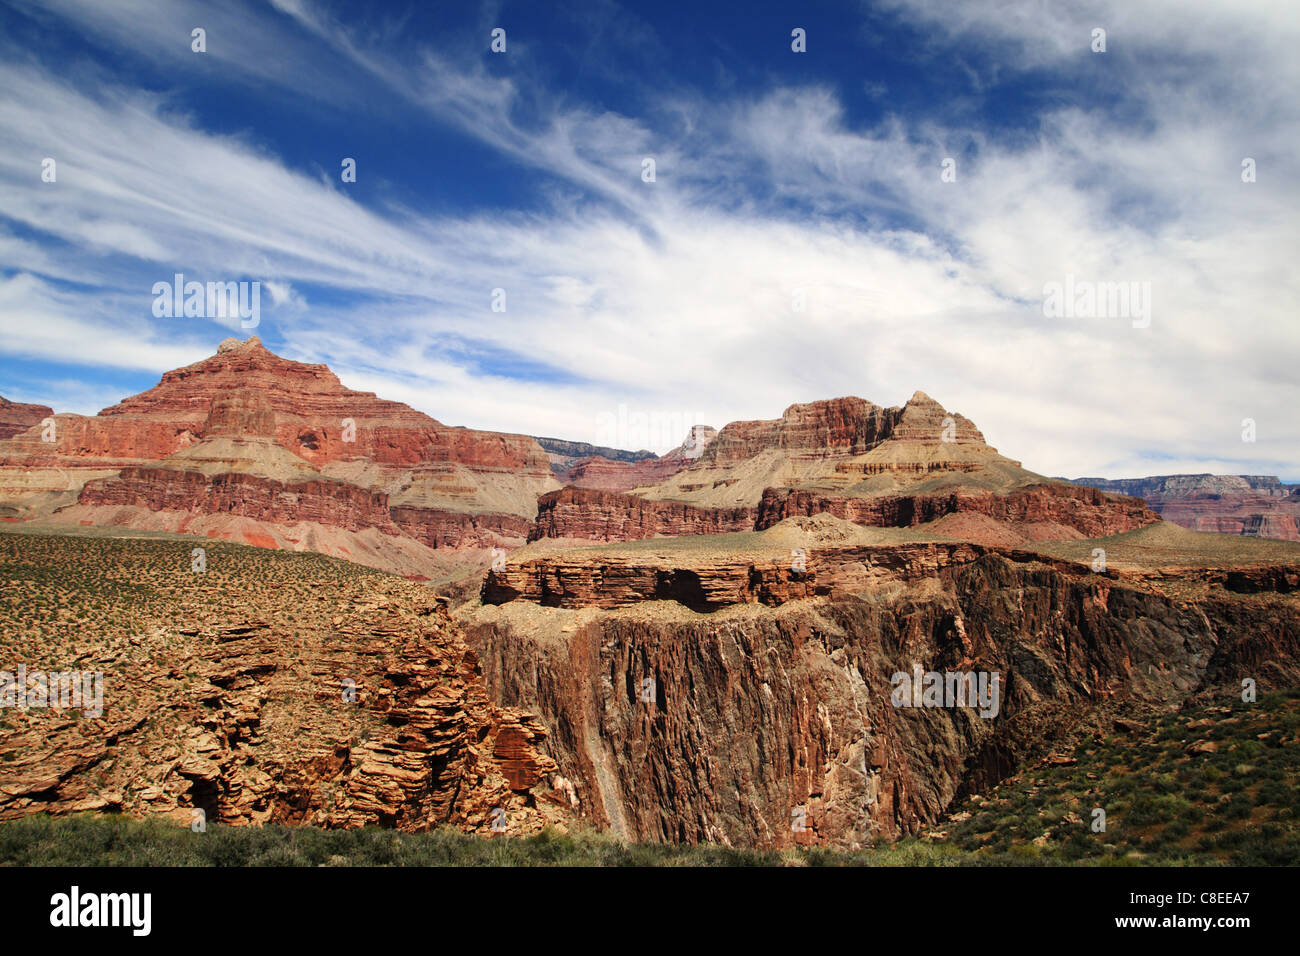 landscape image from the Tonto Plateau below the Grand Canyon Rim Stock Photo